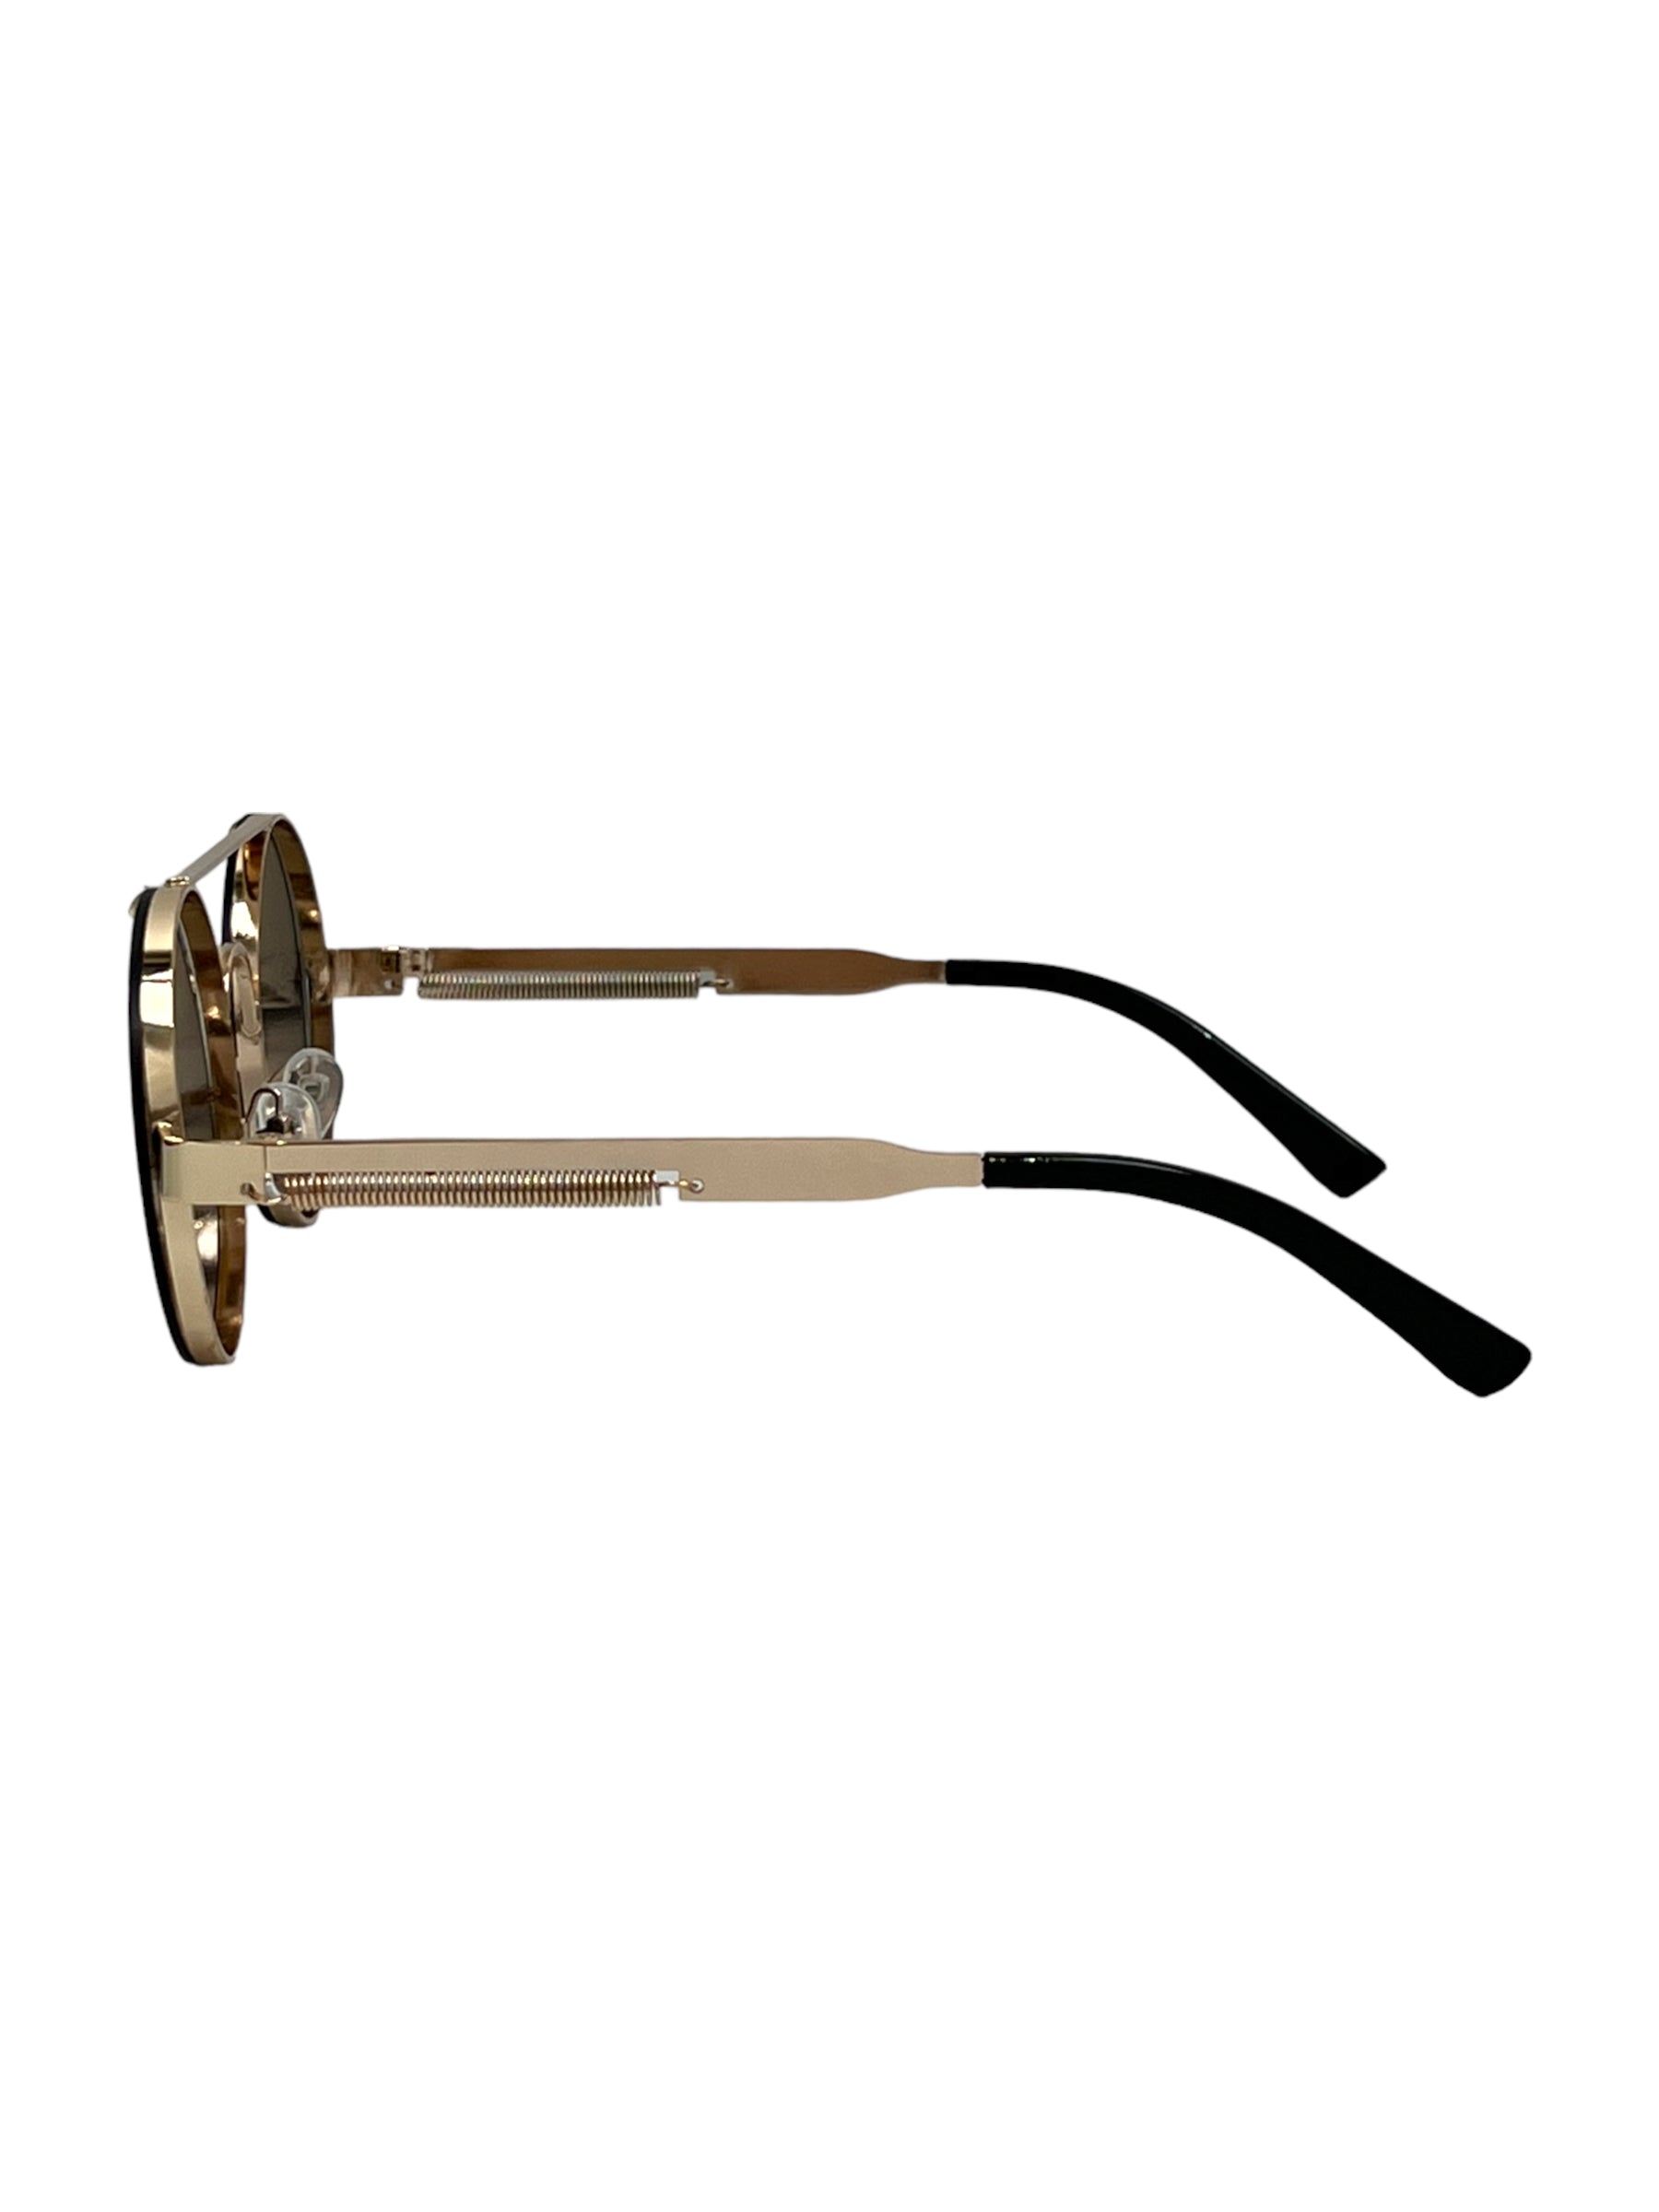 Circle Metal Frame Aviator Style Sunglasses - Genuine Design Luxury Consignment for Men. New & Pre-Owned Clothing, Shoes, & Accessories. Calgary, Canada